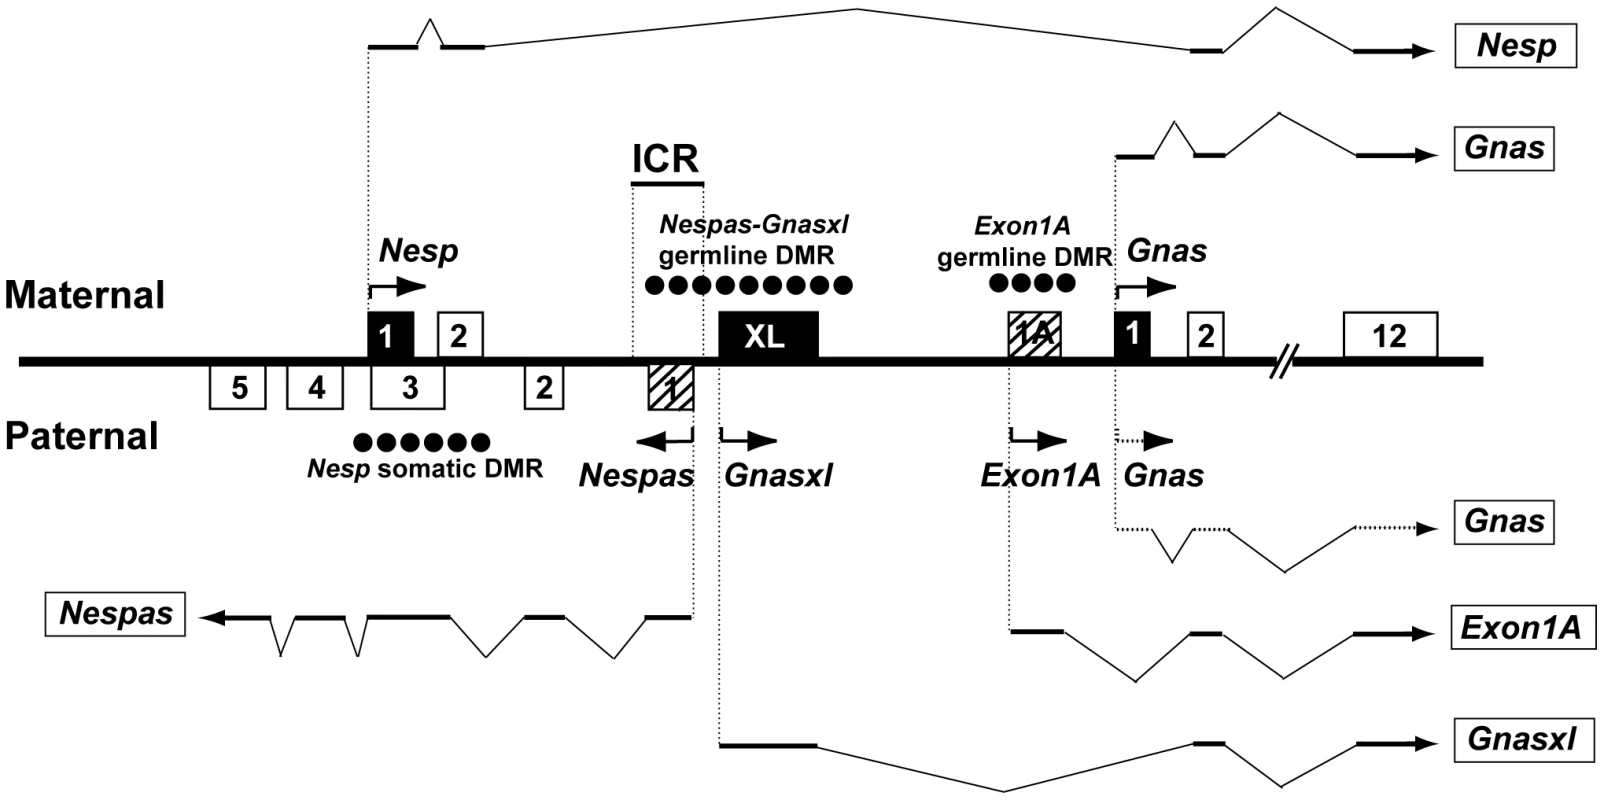 Overview of the mouse <i>Gnas</i> locus showing the organisation of the protein-coding transcripts <i>Nesp</i>, <i>Gnasxl</i>, and <i>Gnas</i> and the paternally expressed non-coding transcripts <i>Nespas</i> and <i>Exon1A</i>.